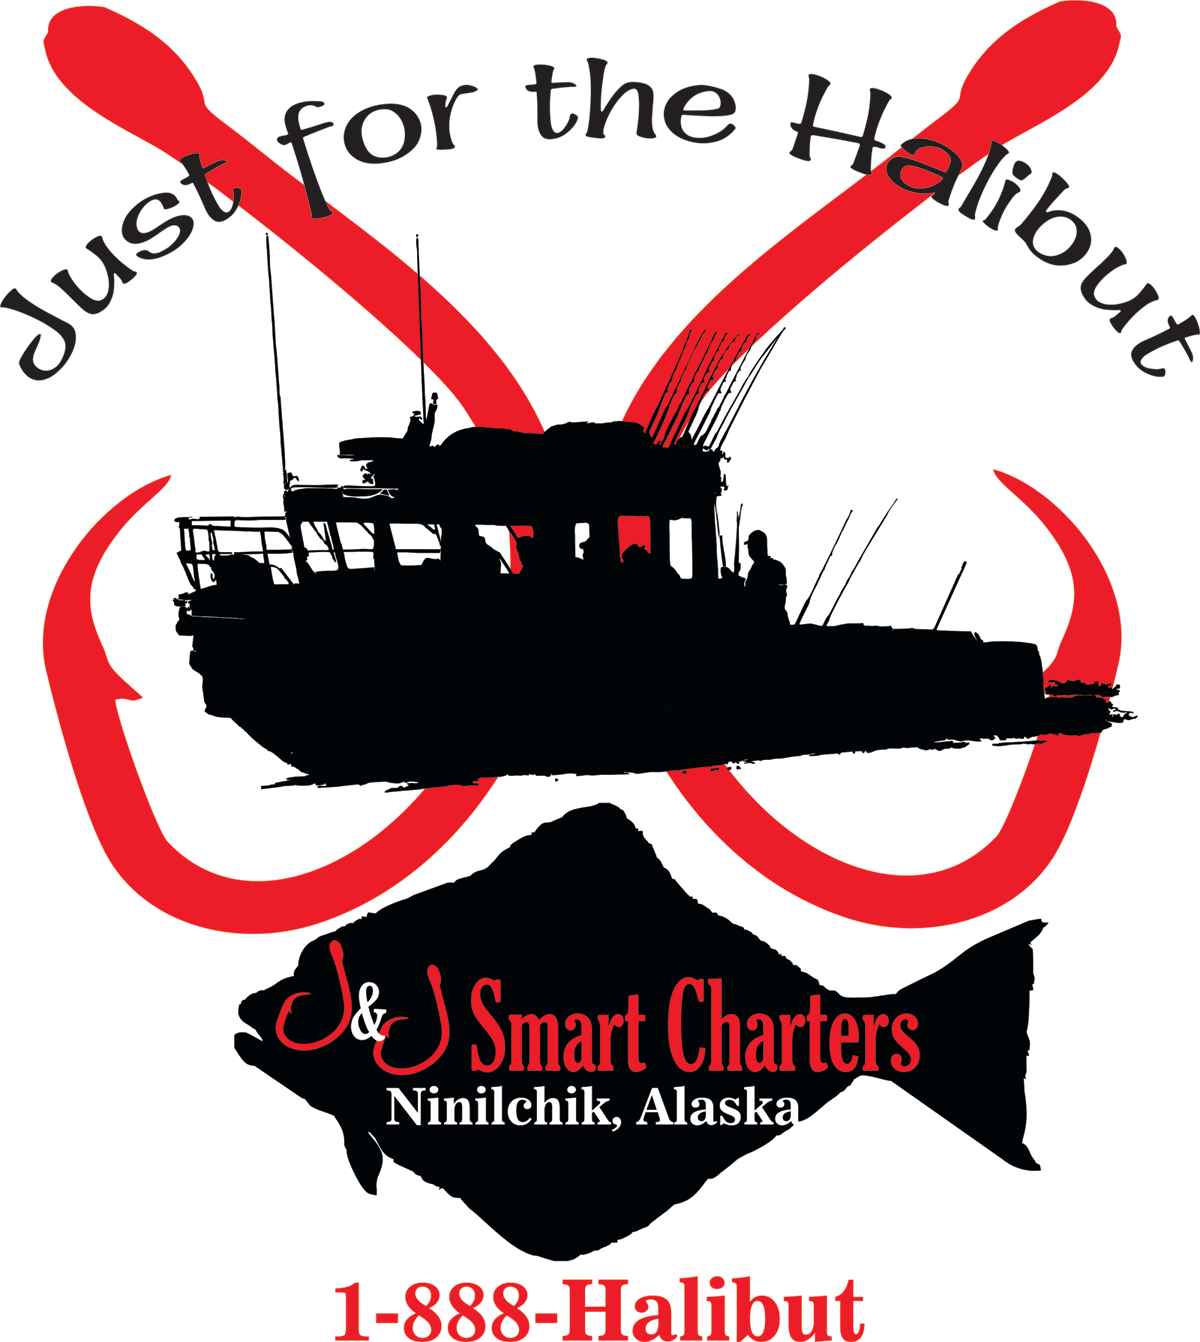 J&J Smart Charters large Just for the Halibut logo with boat, halibut, 2 fish hooks and phone number 1-888-Halibut